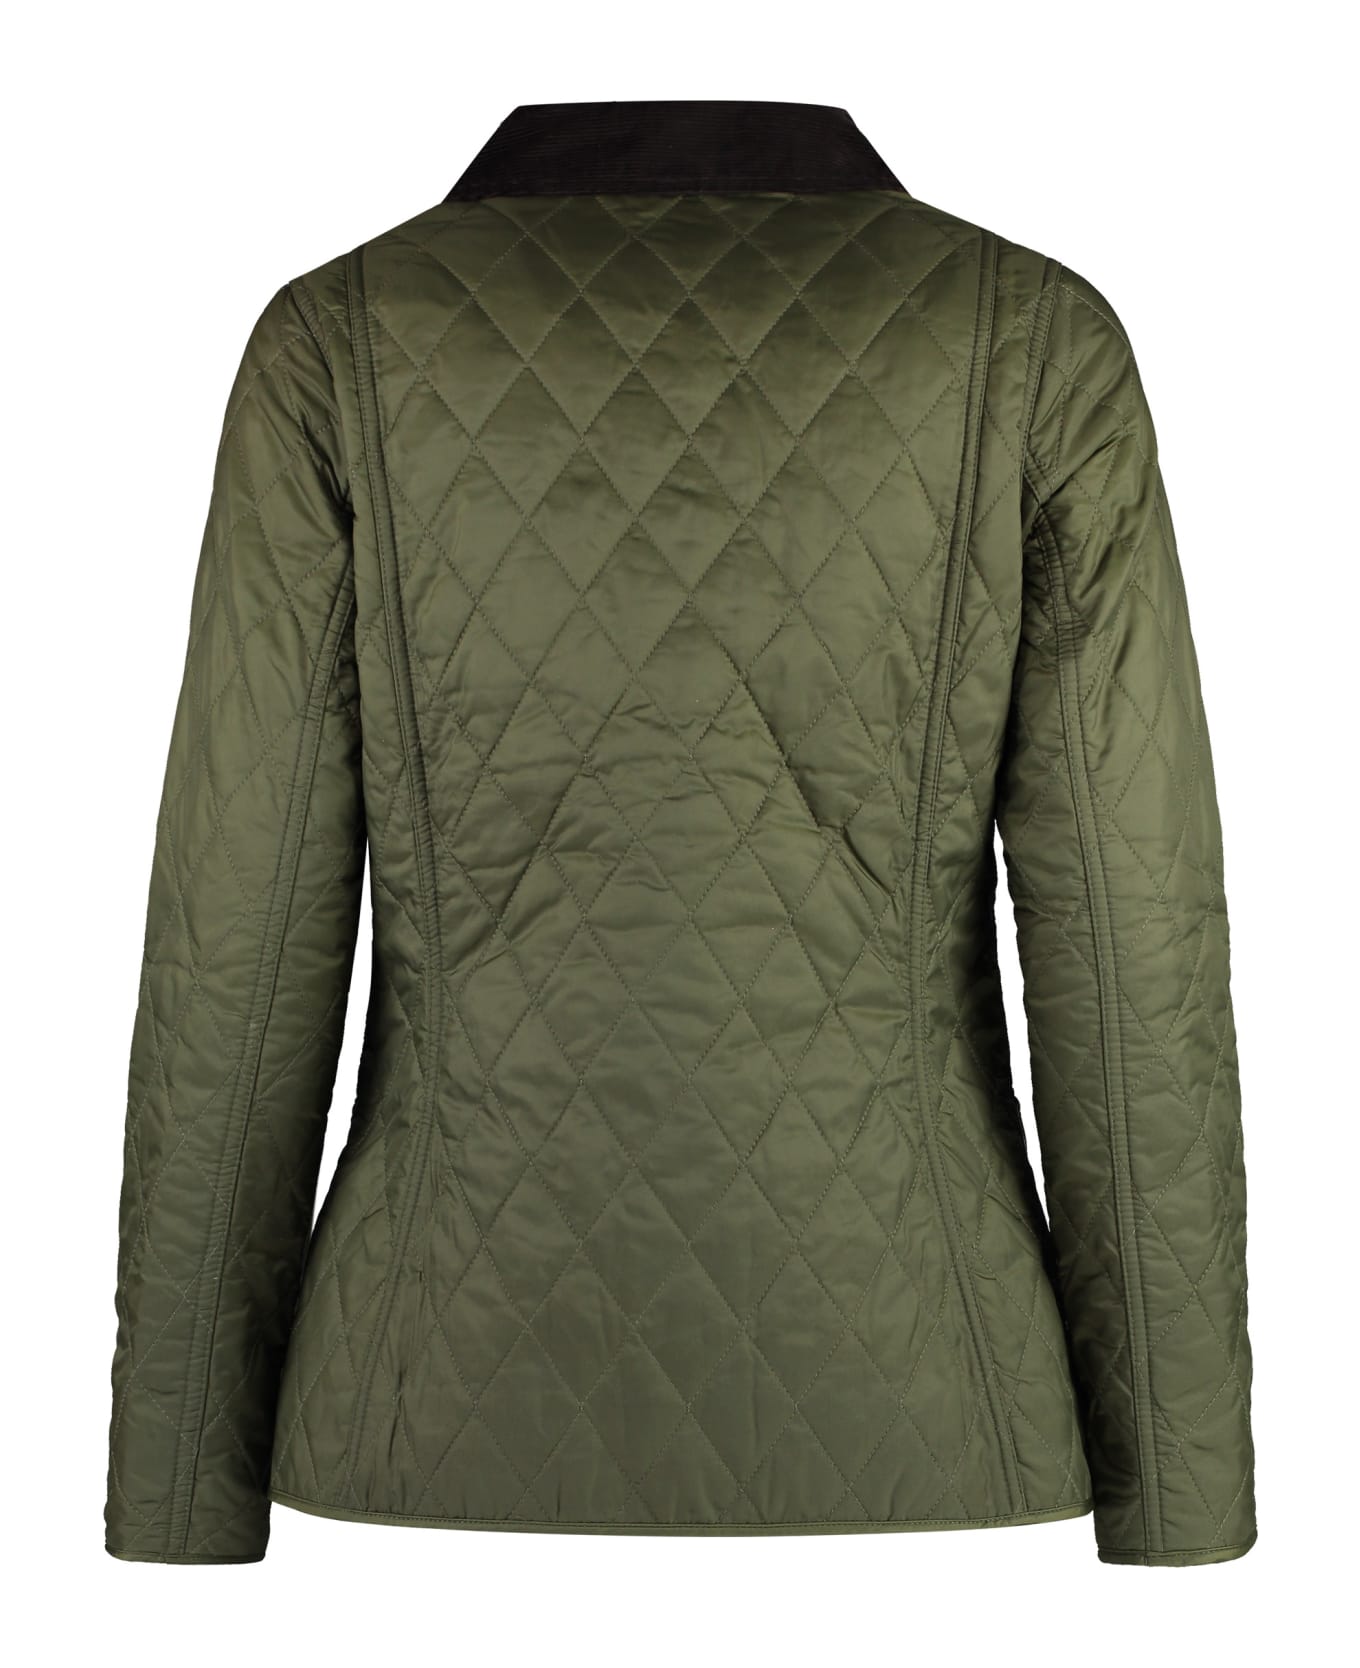 Barbour Annandale Quilted Jacket - green ダウンジャケット